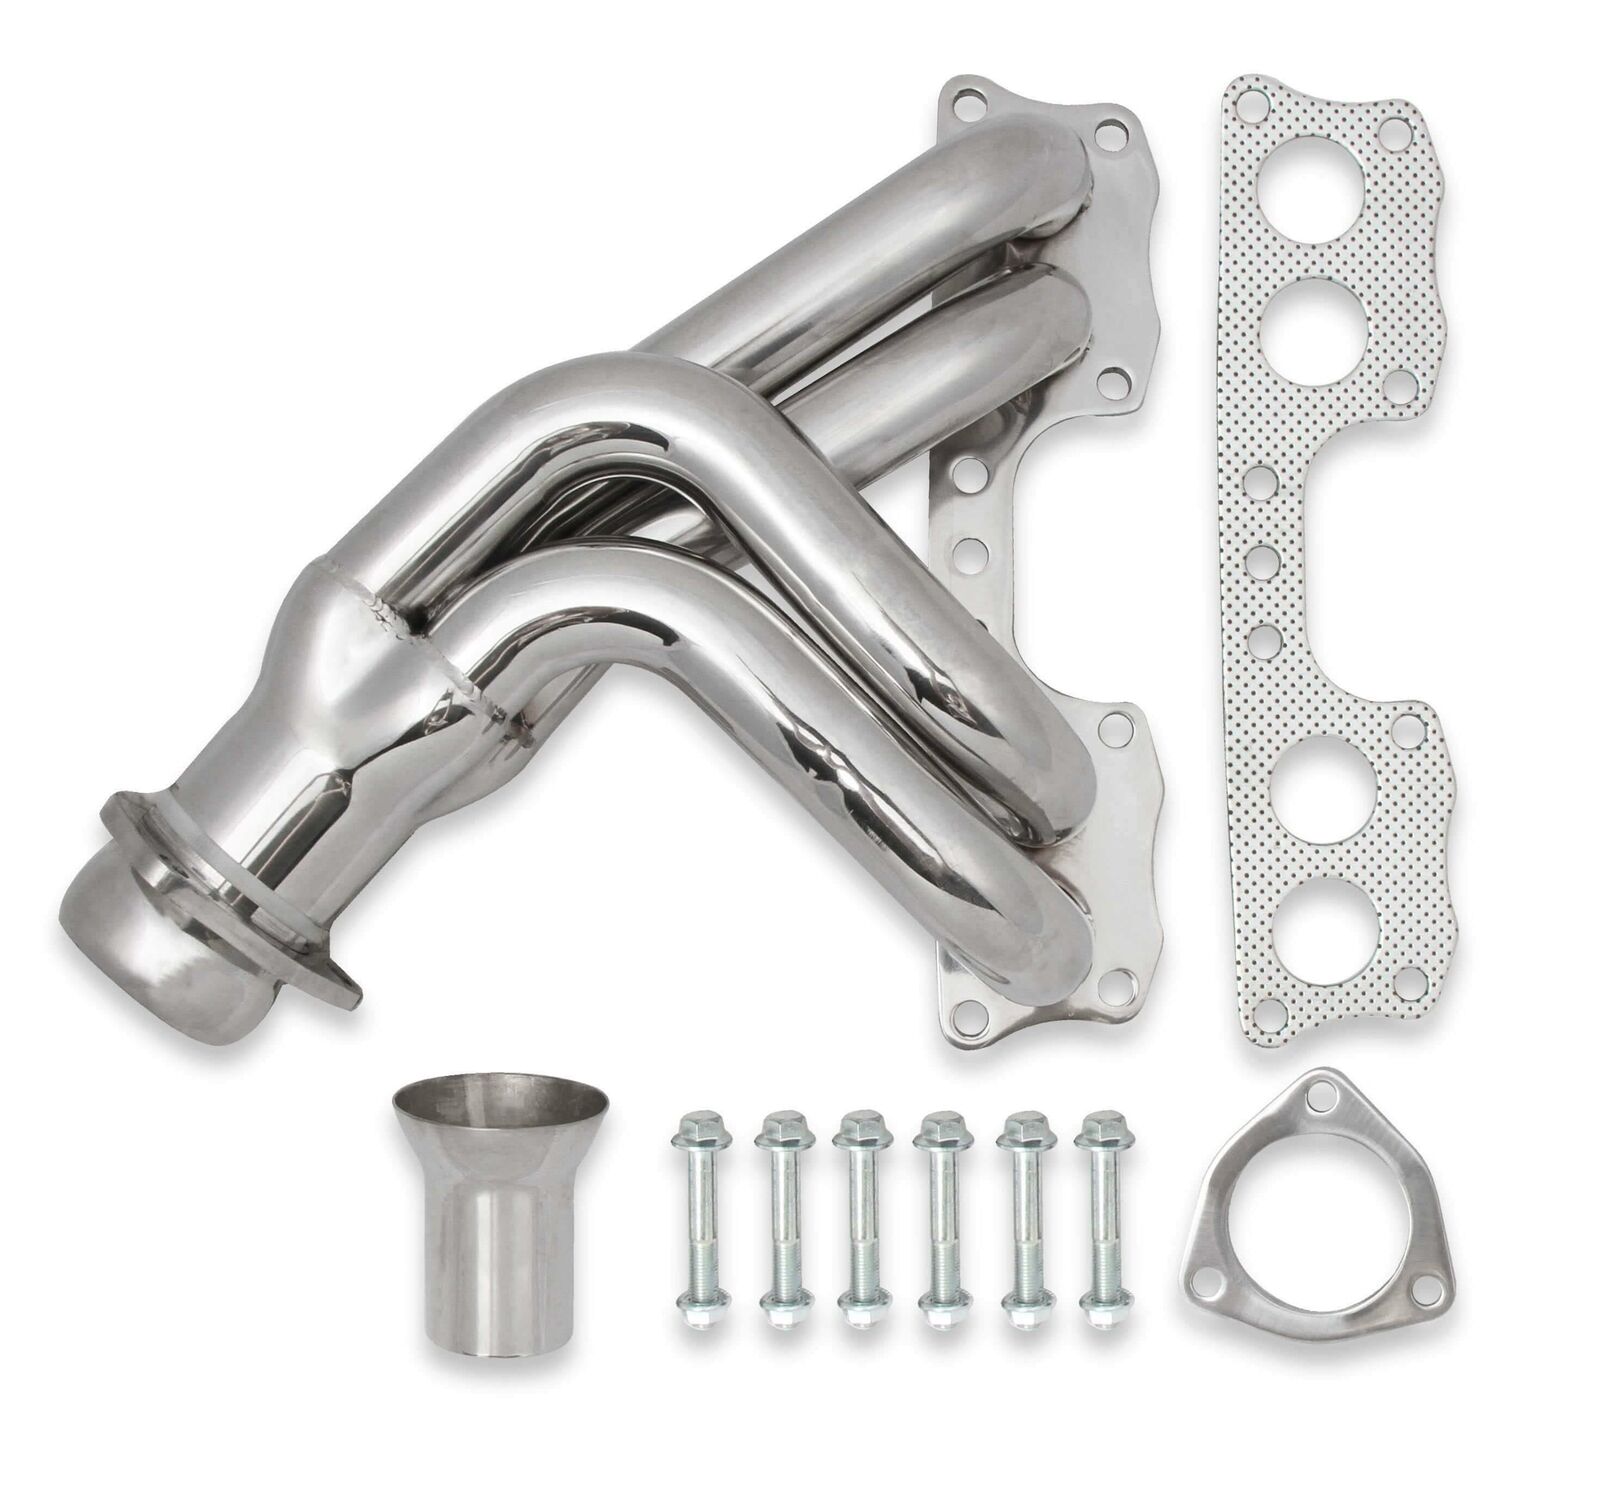 Flowtech Shorty Header for 75-88 Toyota Pickup w/ 20R/22R, Polished-19002FLT